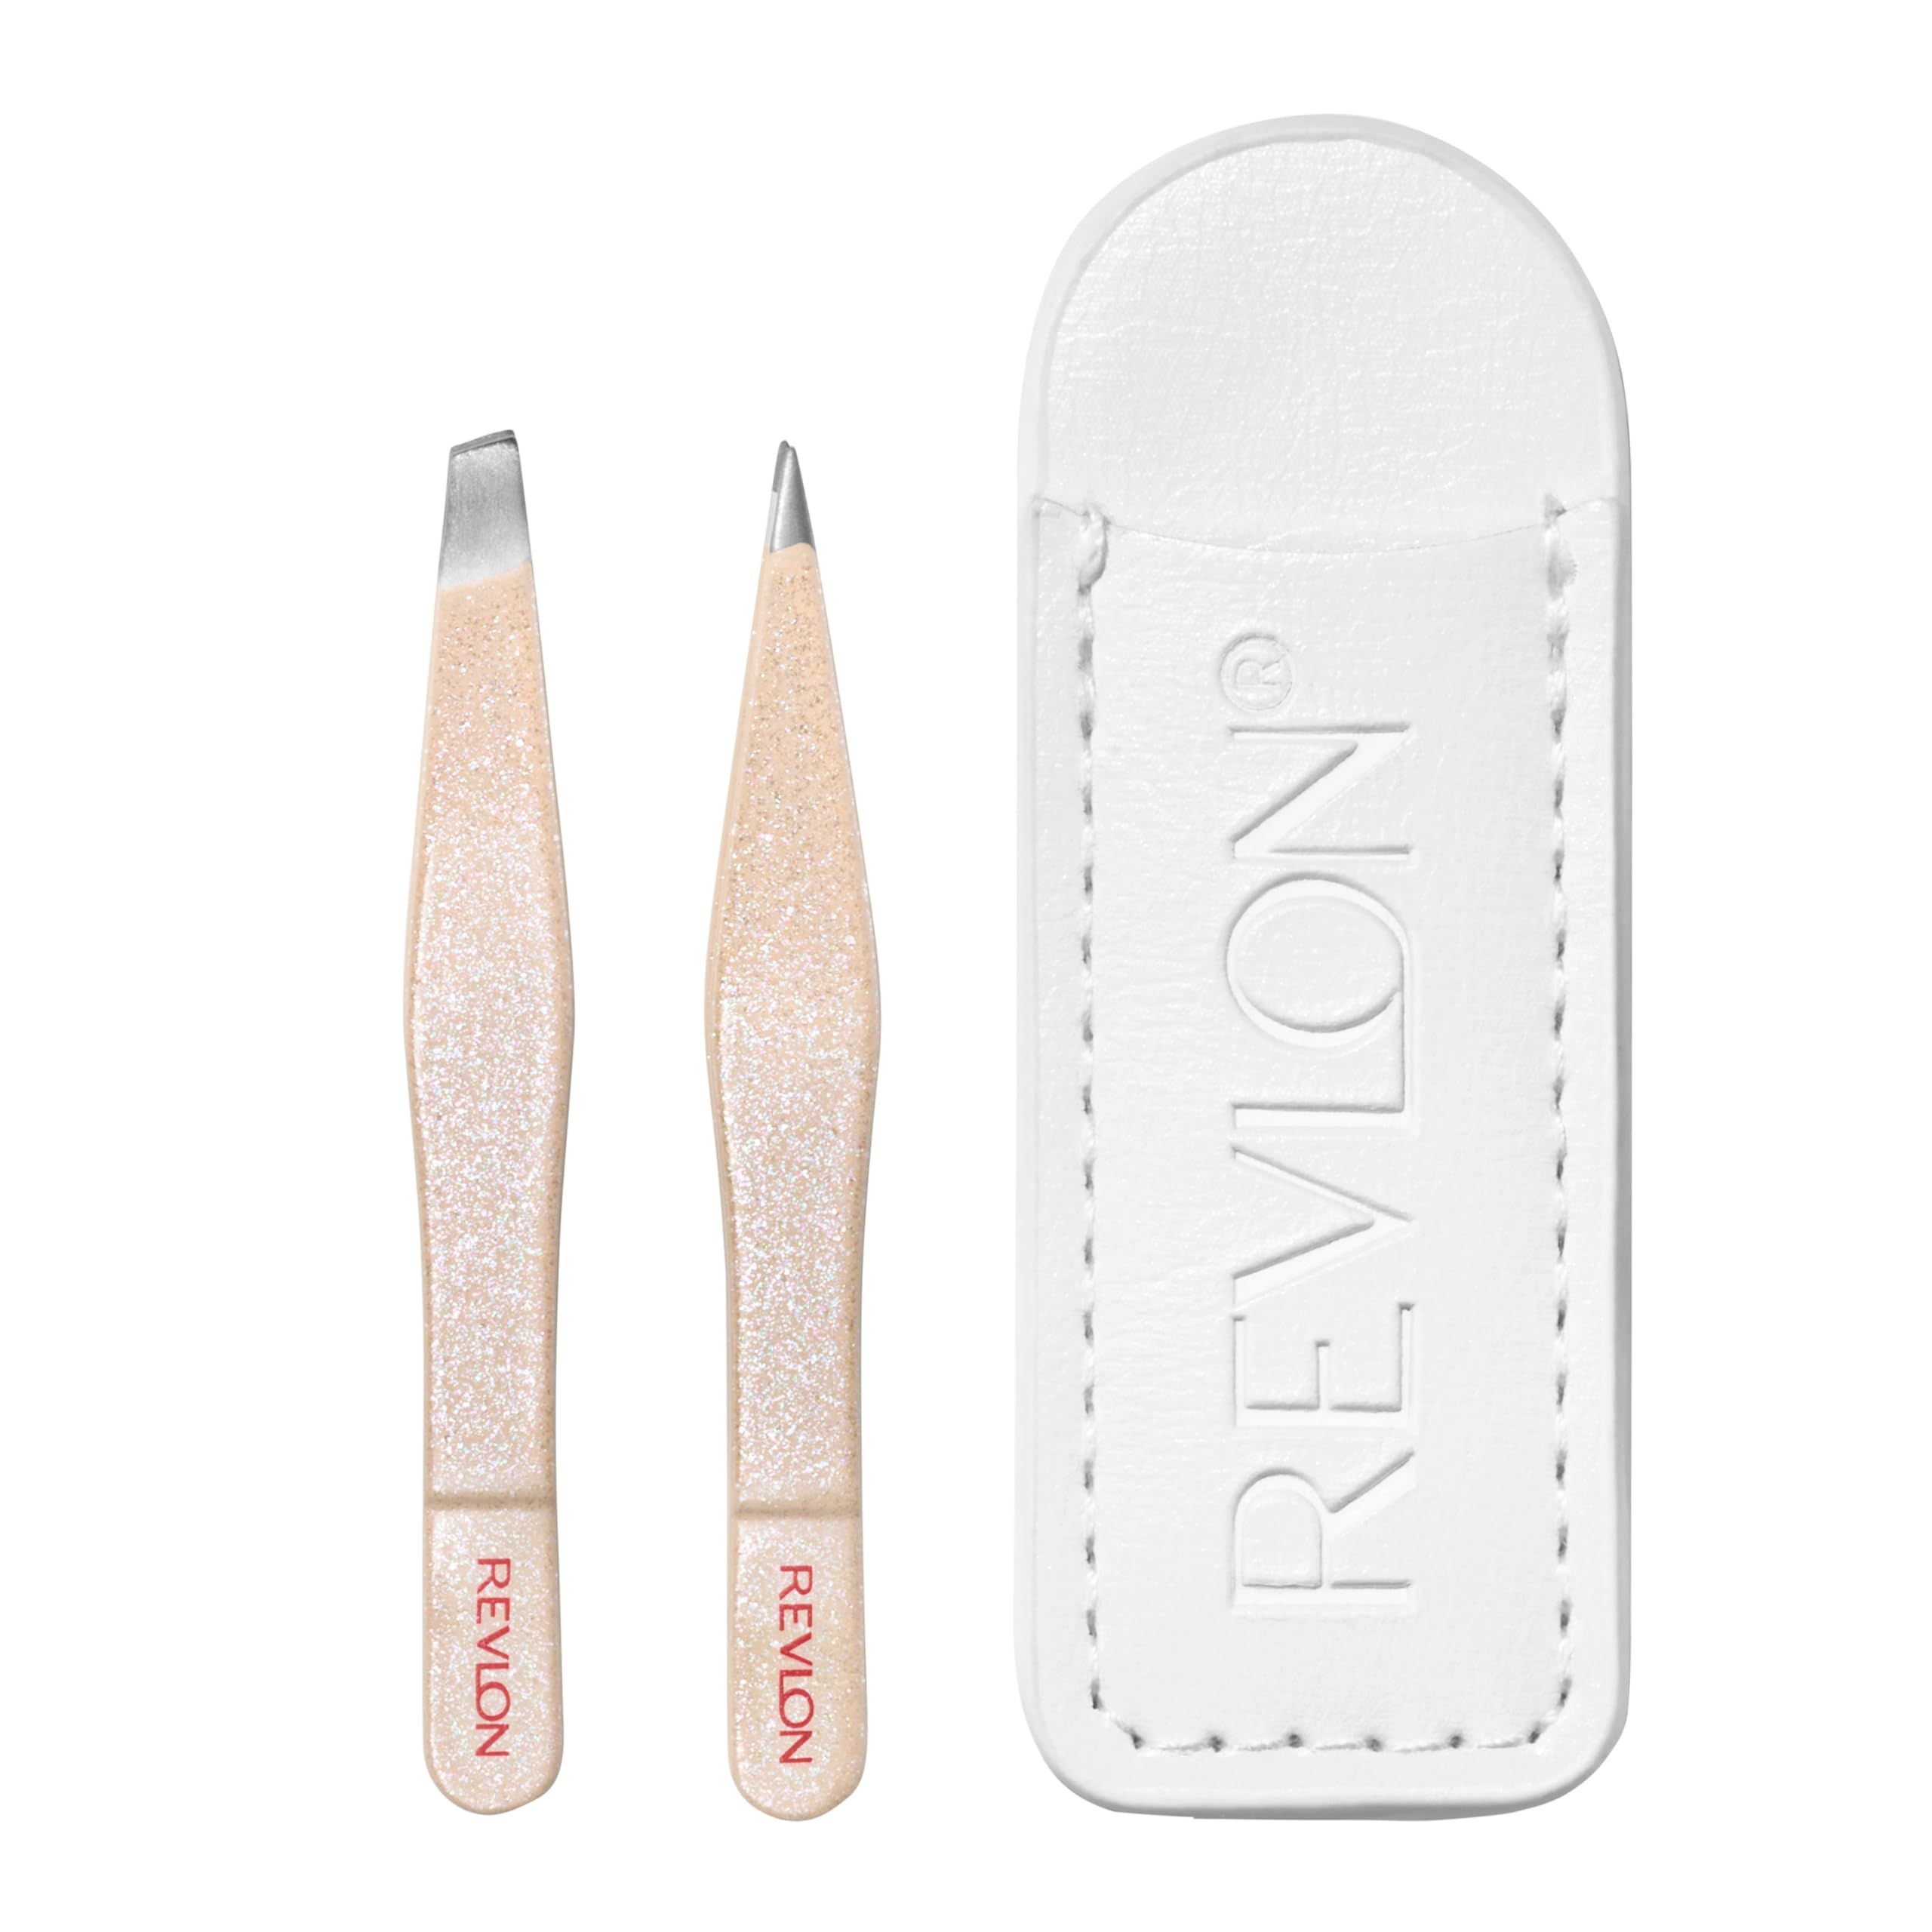 Revlon Designer Series Mini Tweezer Set, Hair Removal Tool Kit with Mini Slant-tip and Point Tip Tweezers, Portable and Easy to Use Made with Long Lasting Stainless Steel, 1 Count